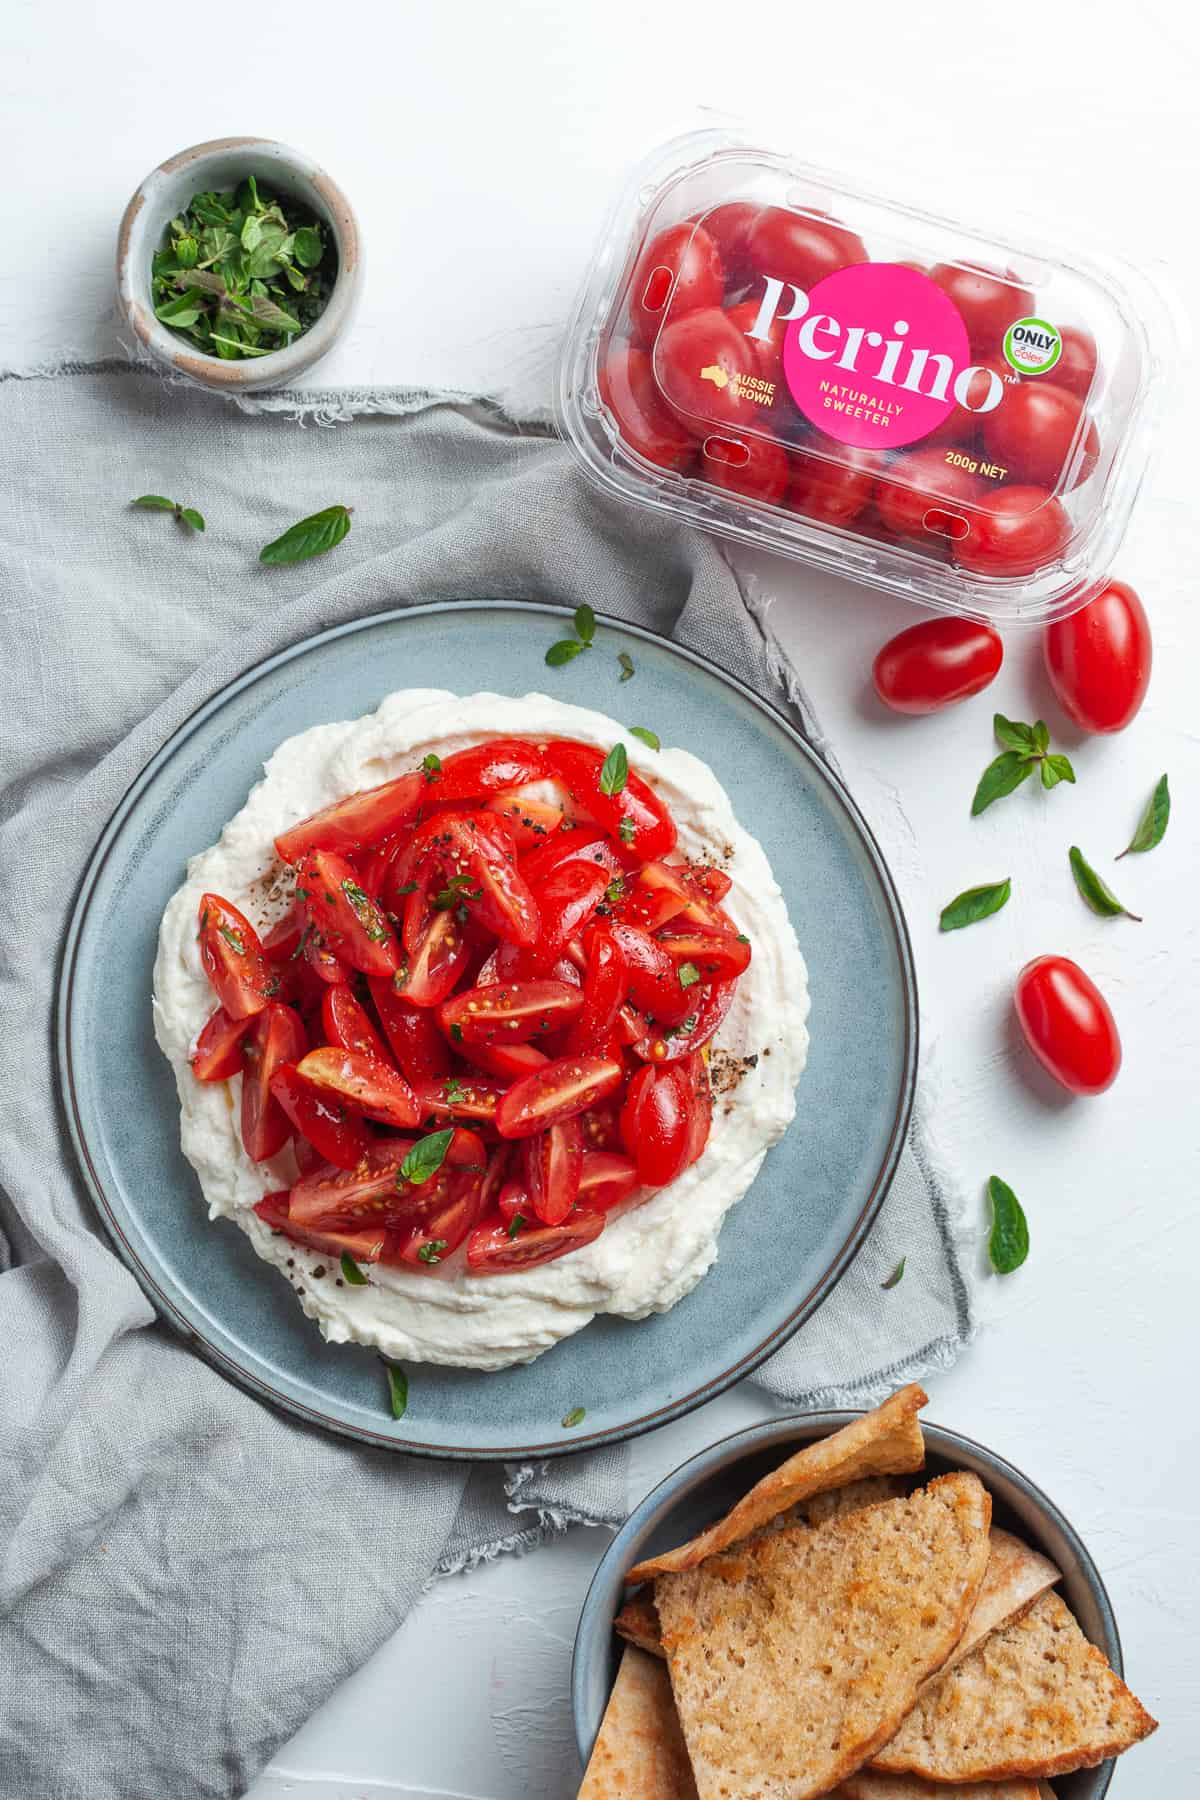 Dish of ricotta and tomatoes on a grey cloth, surrounded by some pita chips, a tub of Perino Grape Tomatoes and some oregano leaves.